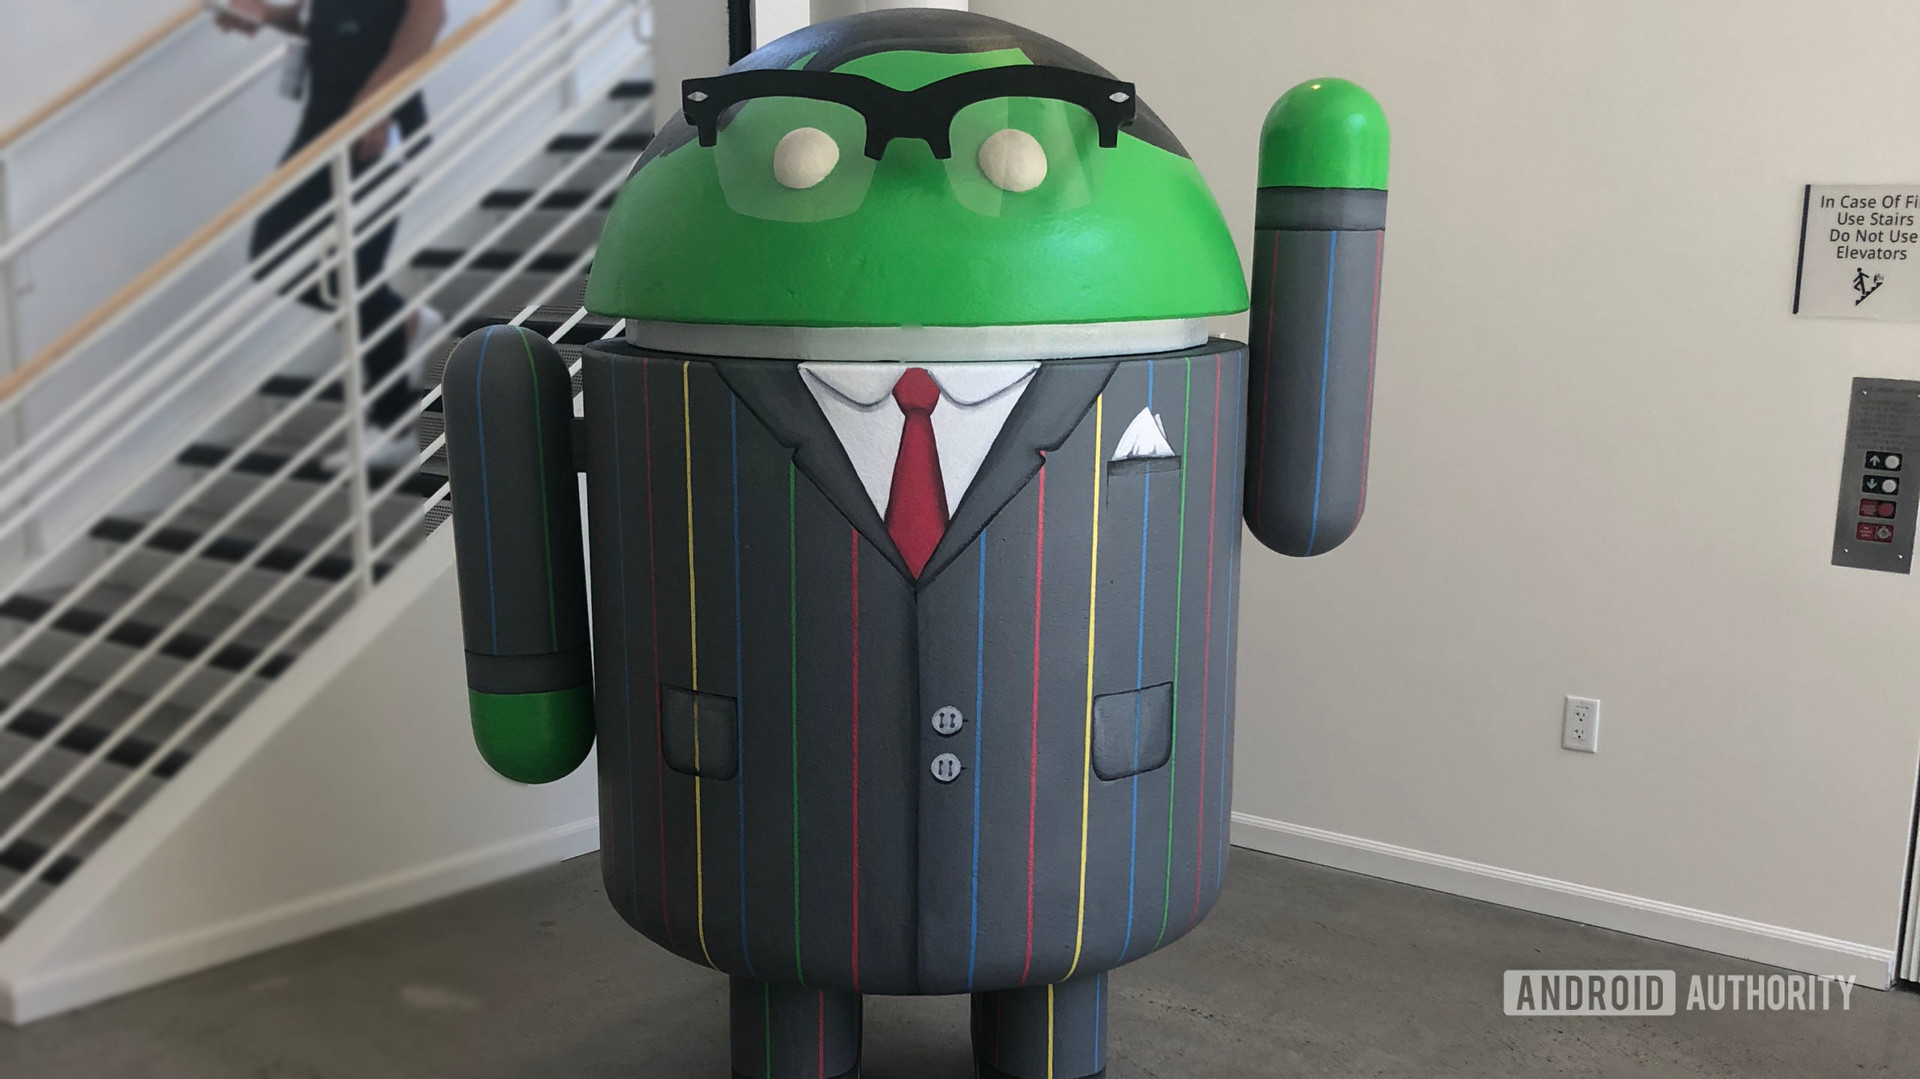 Android statue at Google headquarters